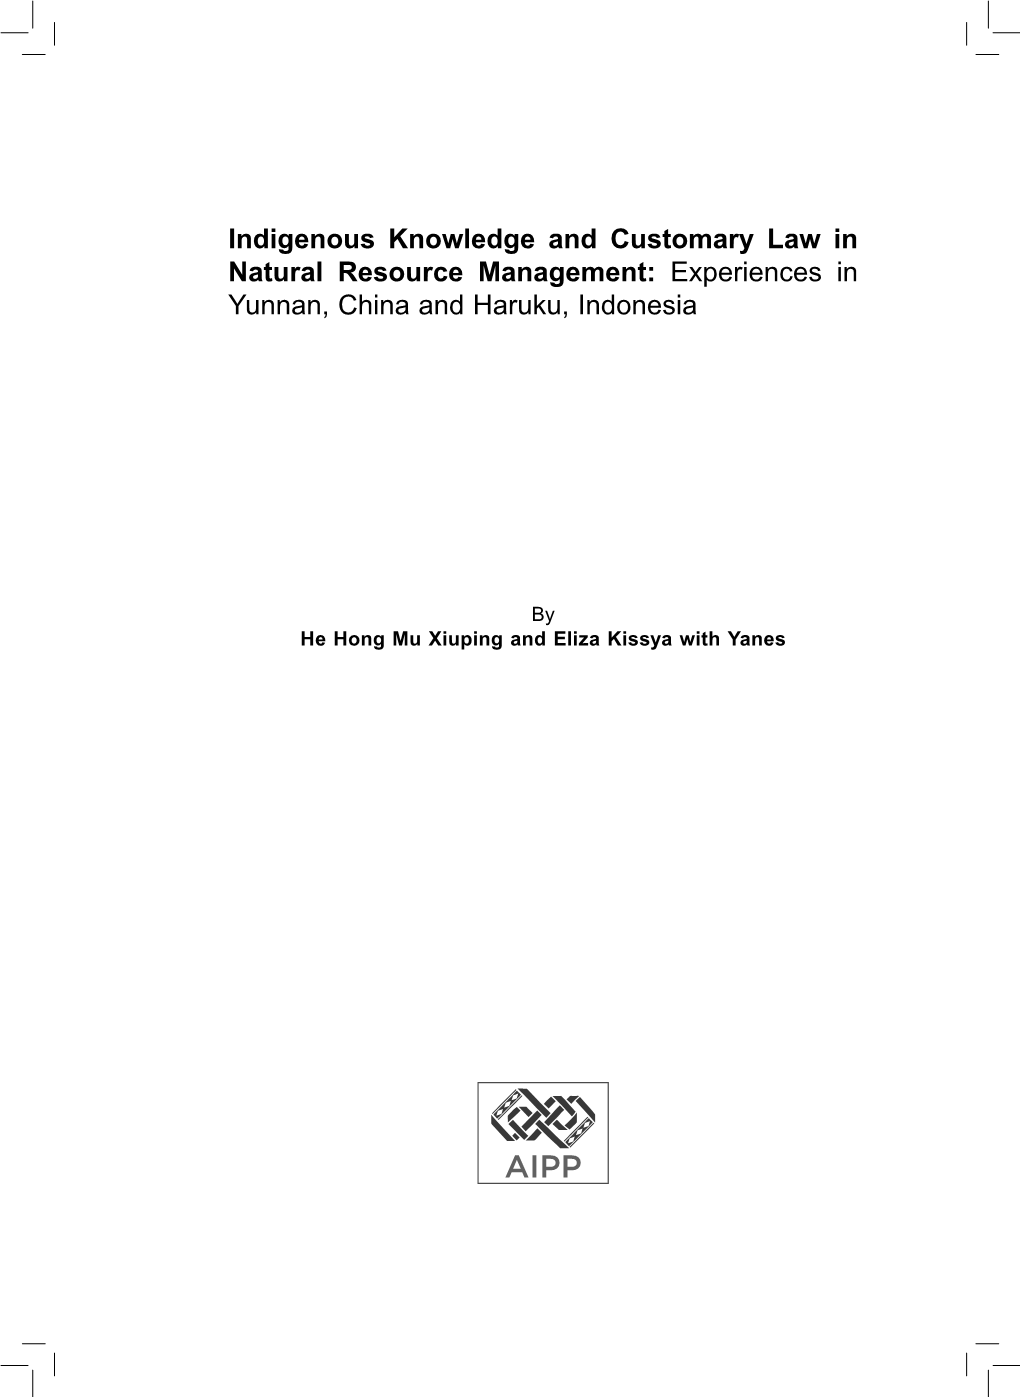 Indigenous Knowledge and Customary Law in Natural Resource Management: Experiences in Yunnan, China and Haruku, Indonesia